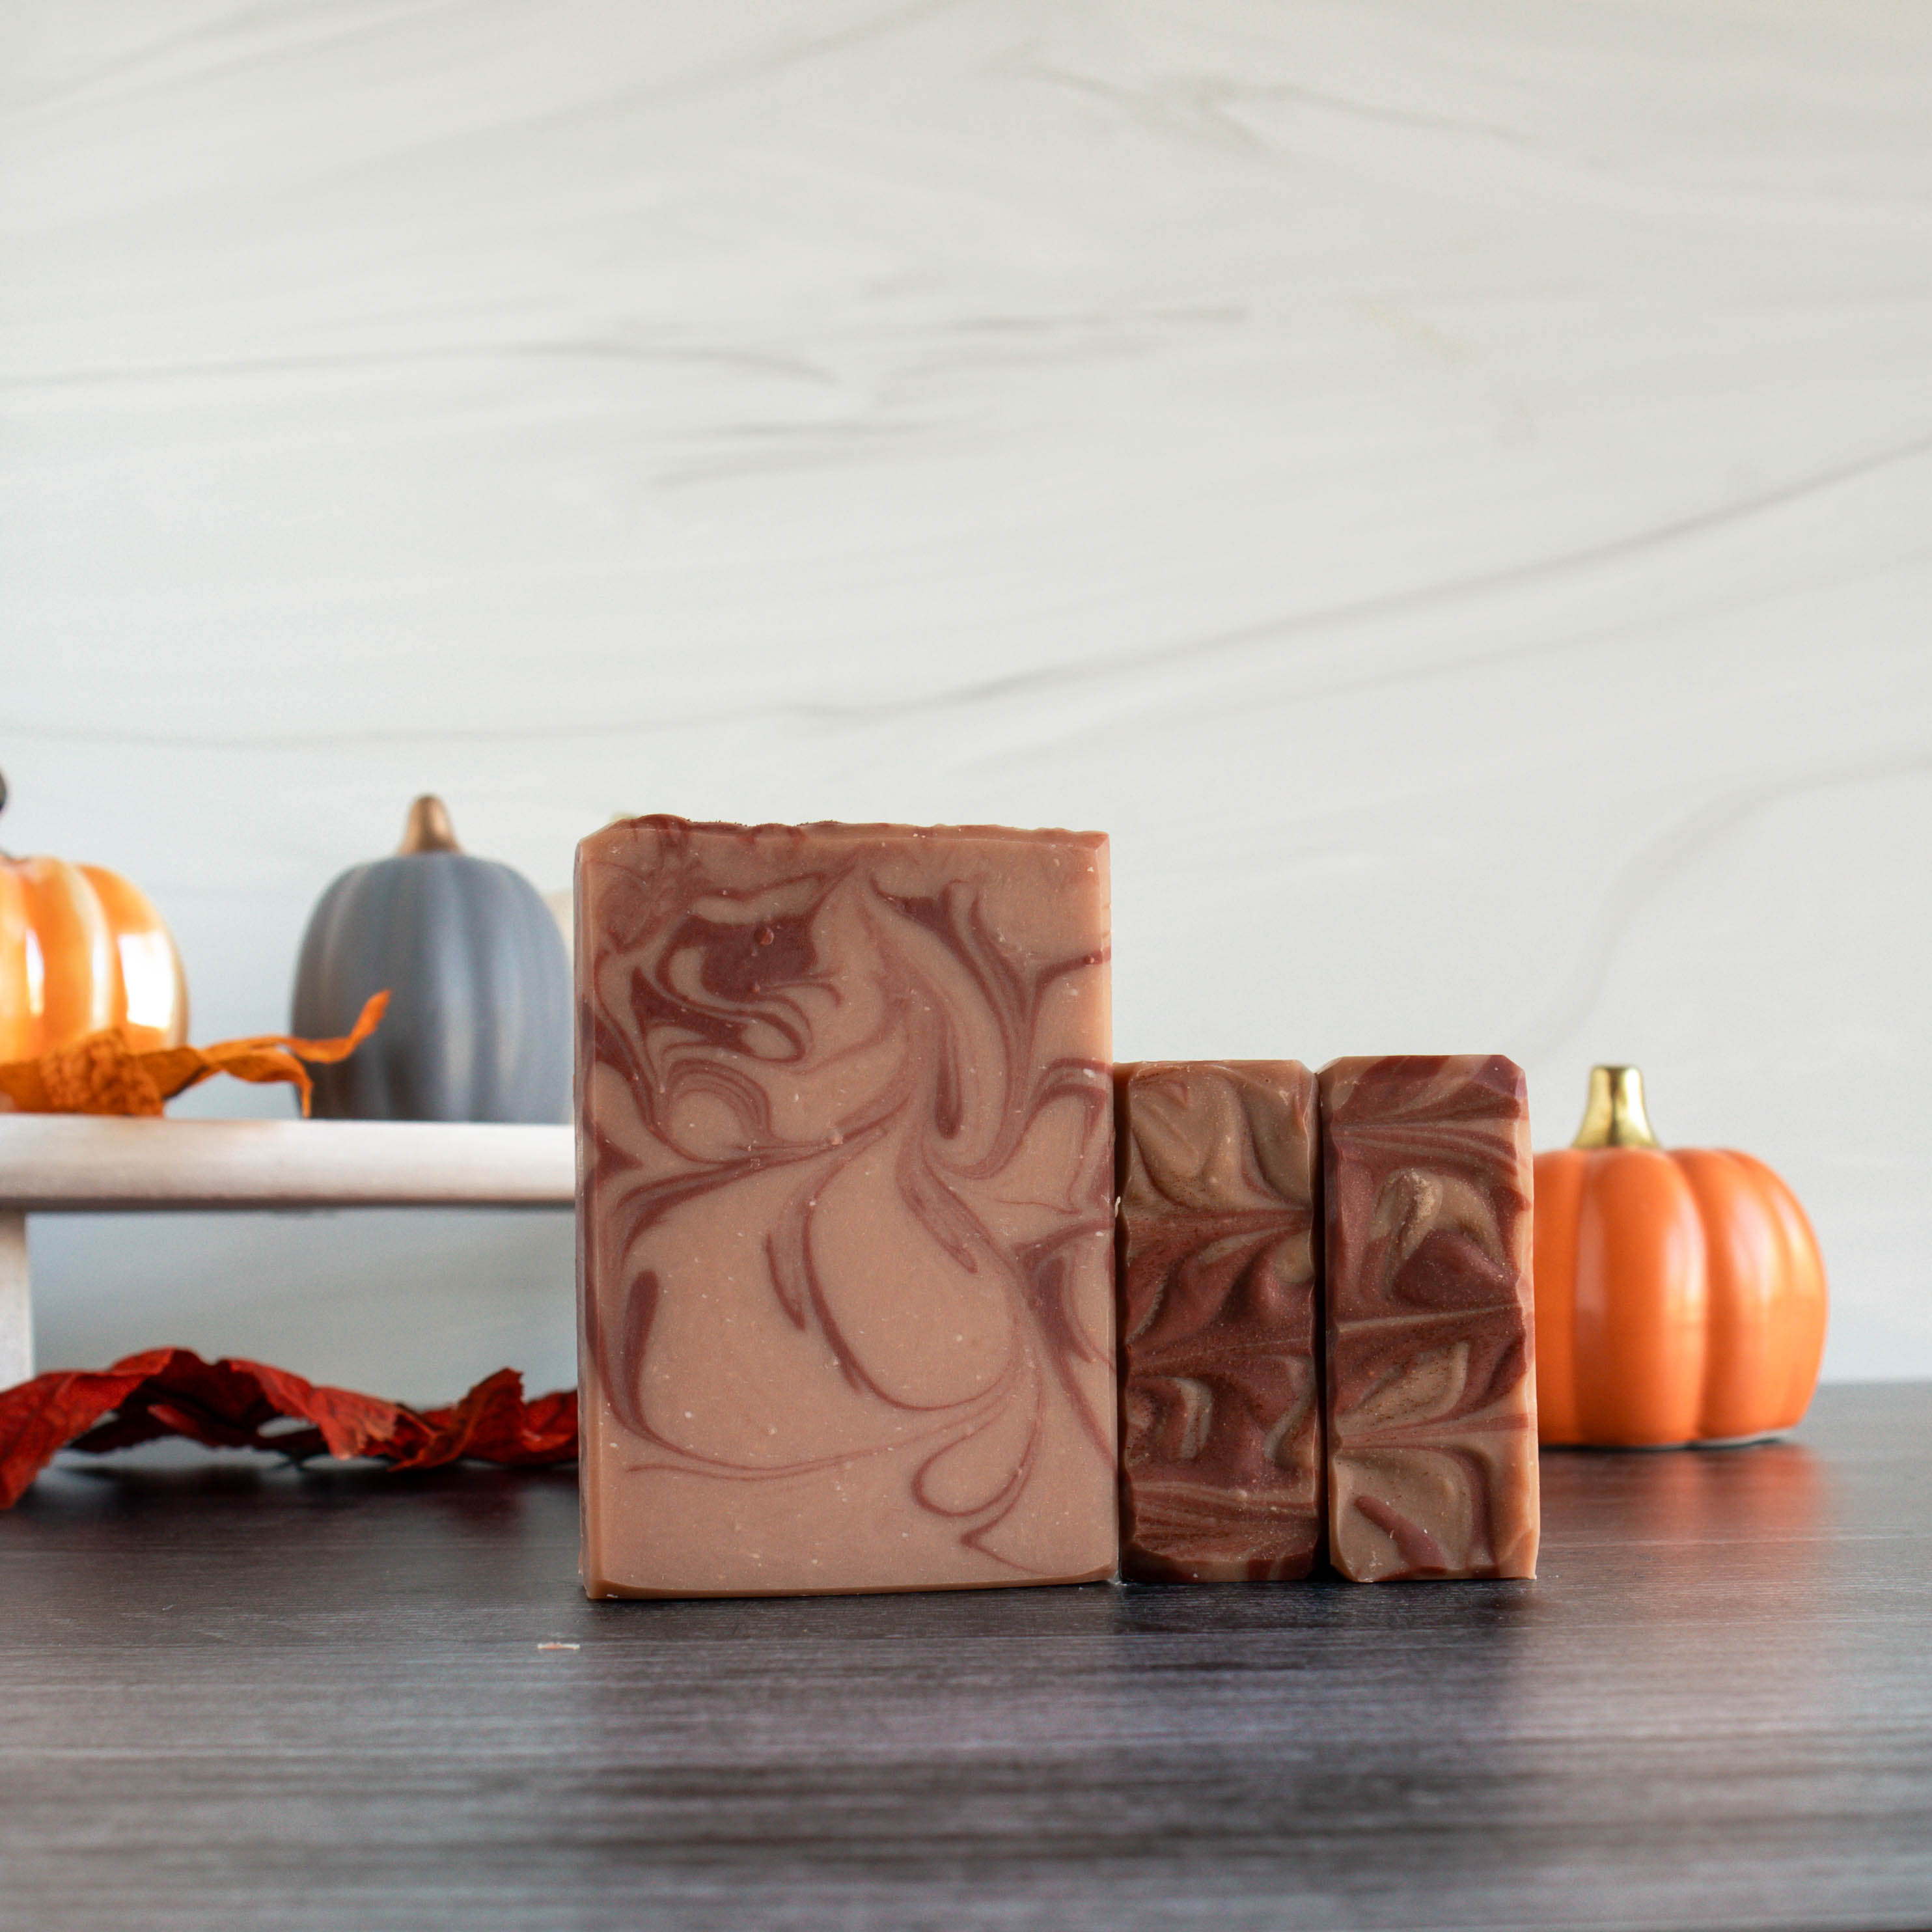 one cranberry pumpkin soap is standing showing the pretty tan and rust red swirls, 2 others are laying on the sides to show the top swirls in the same colors. there are several pumpkins in the background of different colors